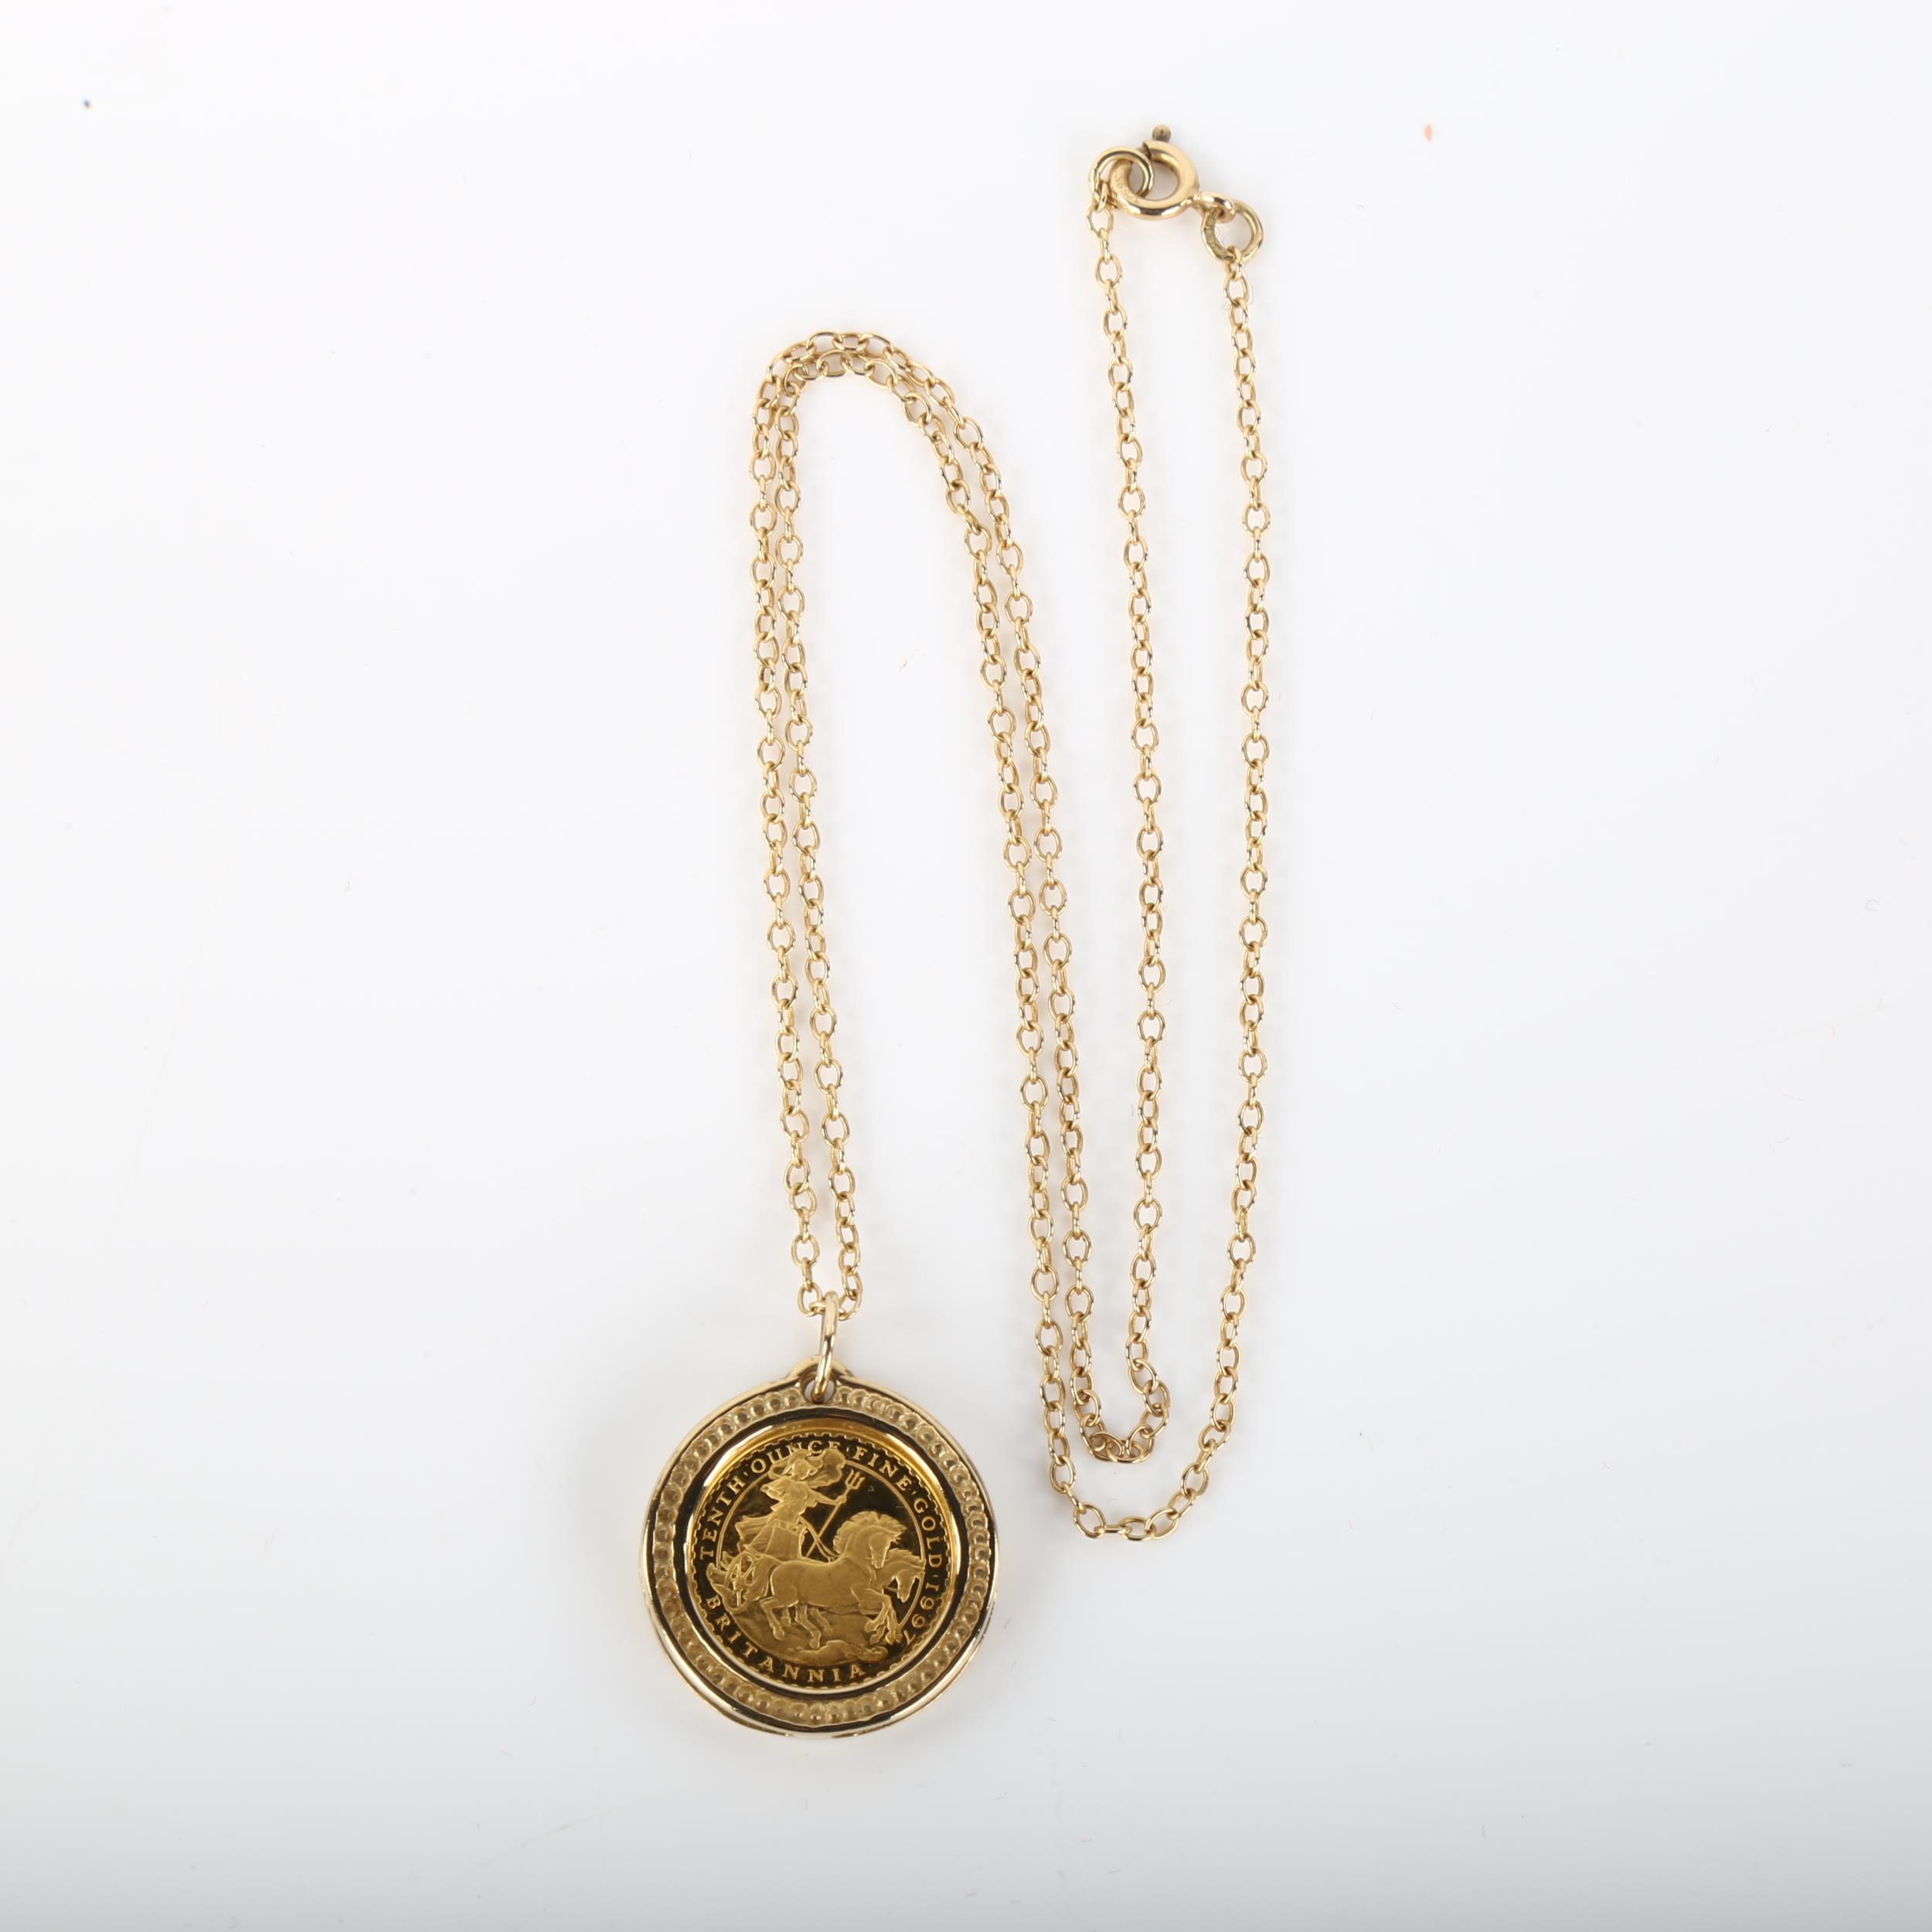 A 1997 Britannia gold proof £10 coin pendant necklace, chain length 44cm, 8.1g, limited edition - Image 2 of 4